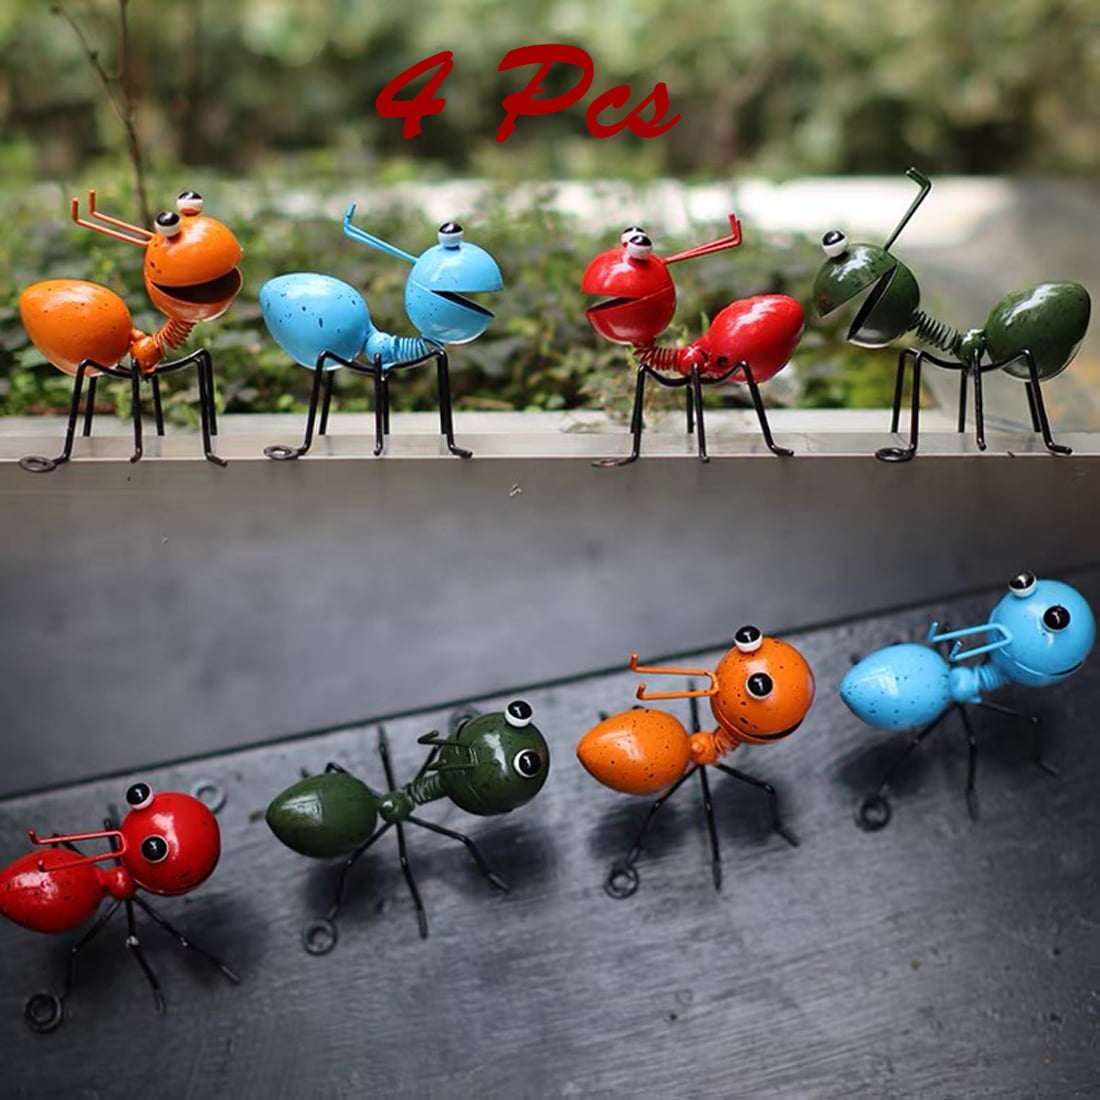 garden mile® Hanging Garden Metal Ant Ornament Wall Clinger 1, Medium Ant Reclaimed Metal Garden Hanger Decoration Insect Sculpture Bug Fence Crawler Decking and Patio Vertical Wall Sculptures